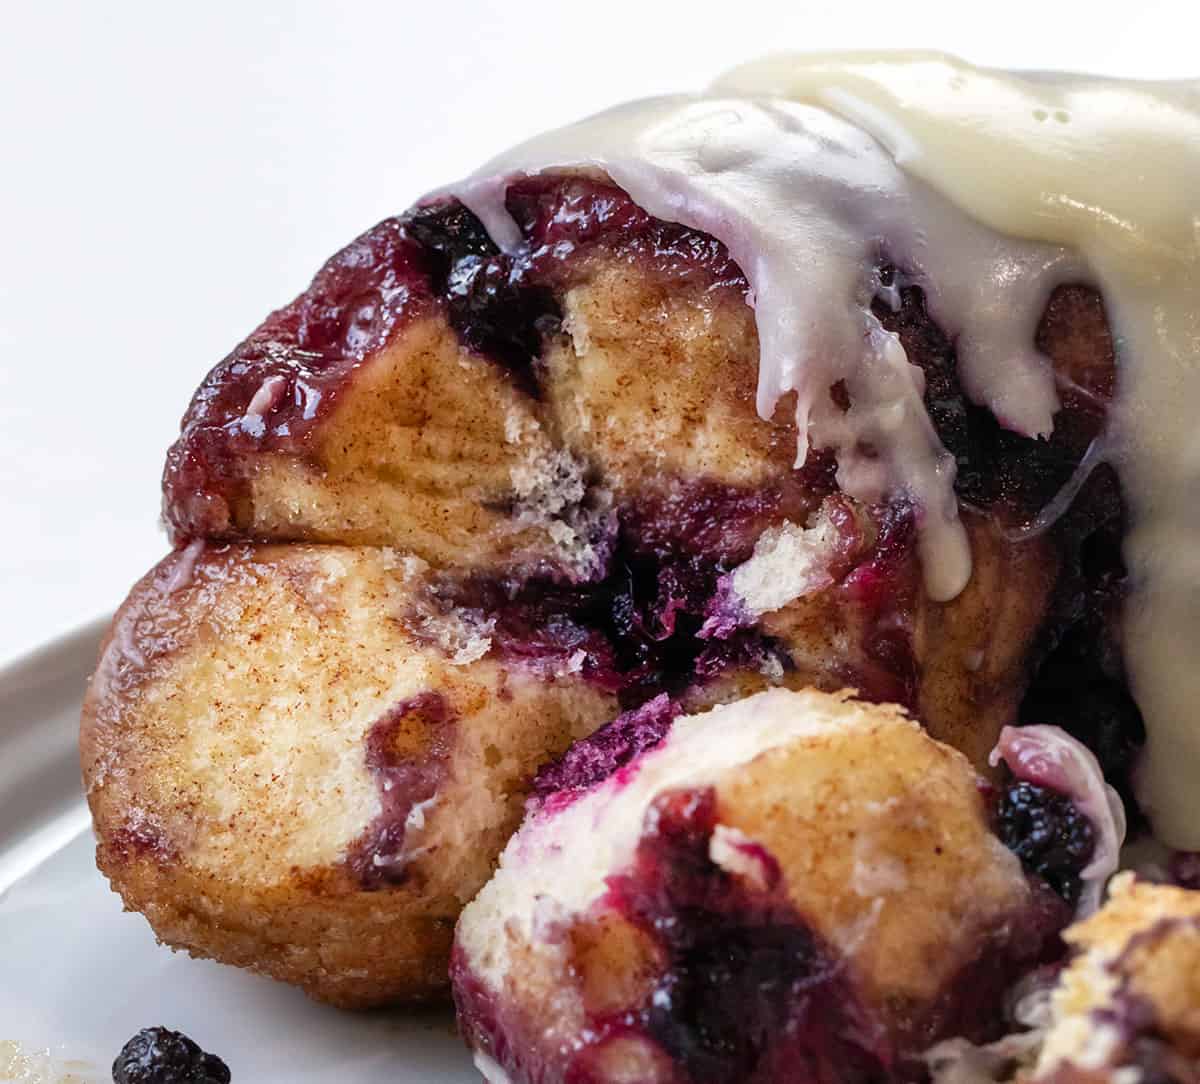 Inside of Blueberry Monkey Bread showing the bread texture.